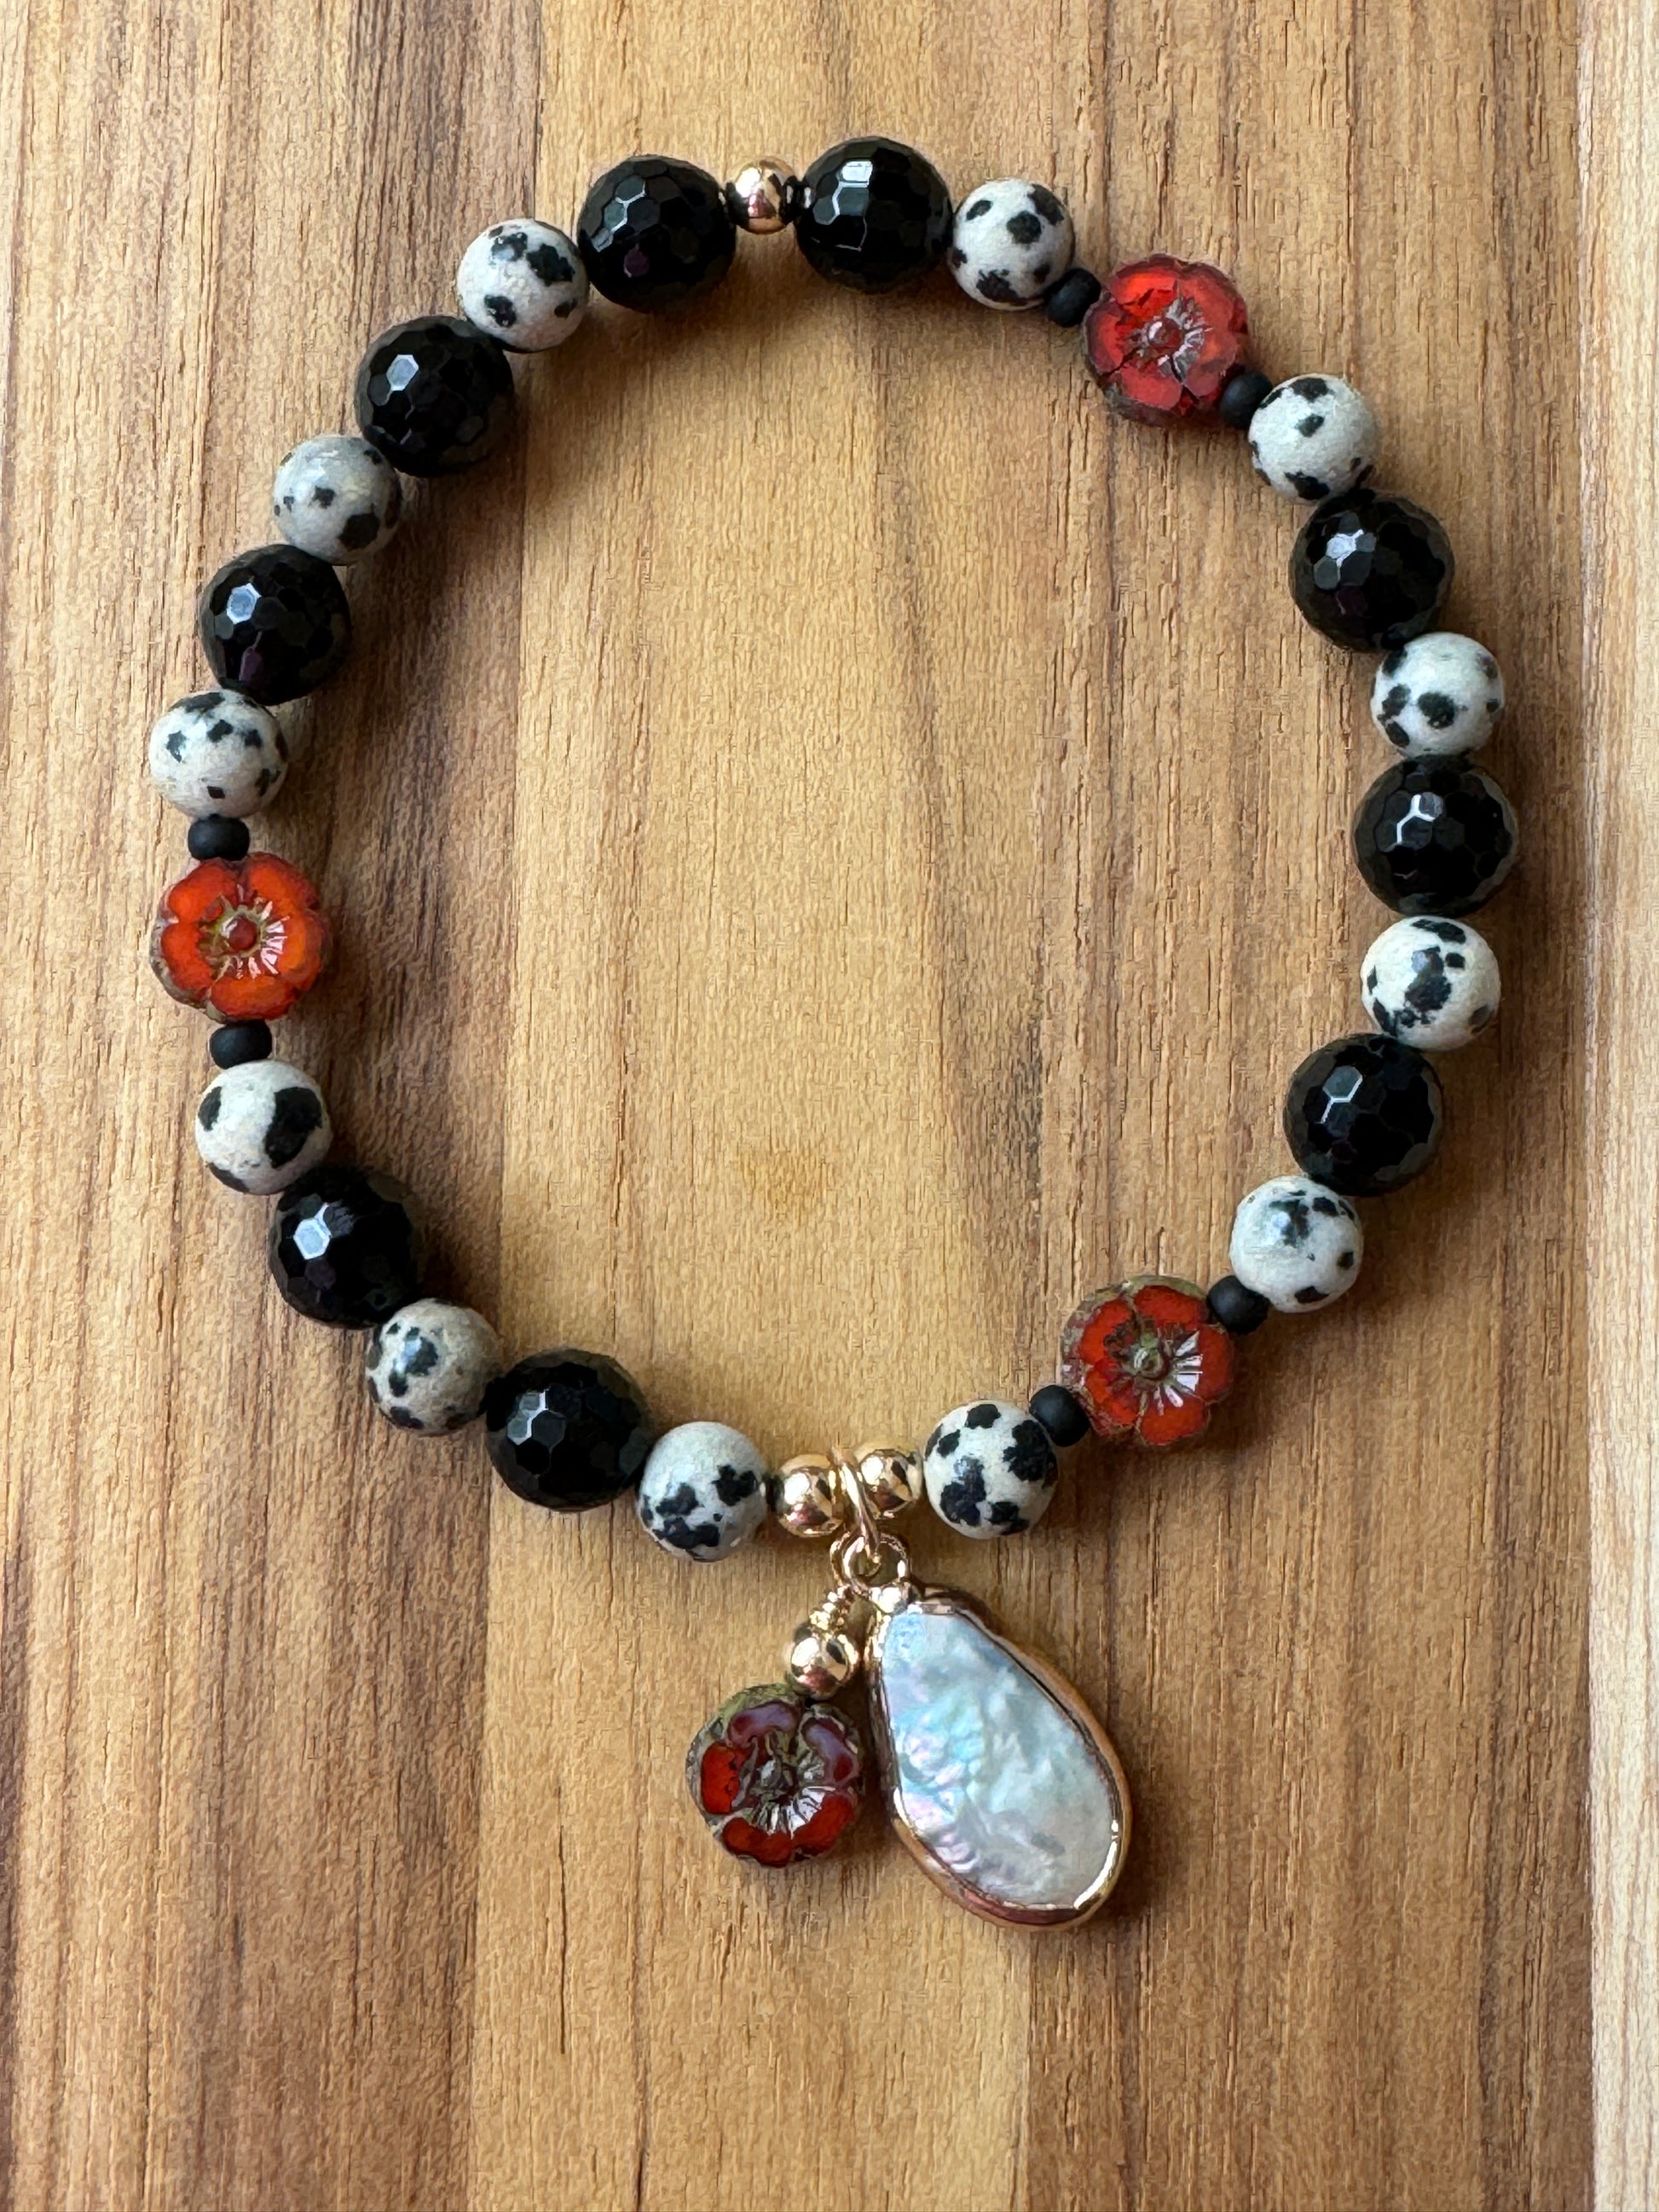 Dalmatian Jasper and Black Onyx Stretch Beaded Bracelet with Baroque Pearl and Red Flower Dangles - My Urban Gems